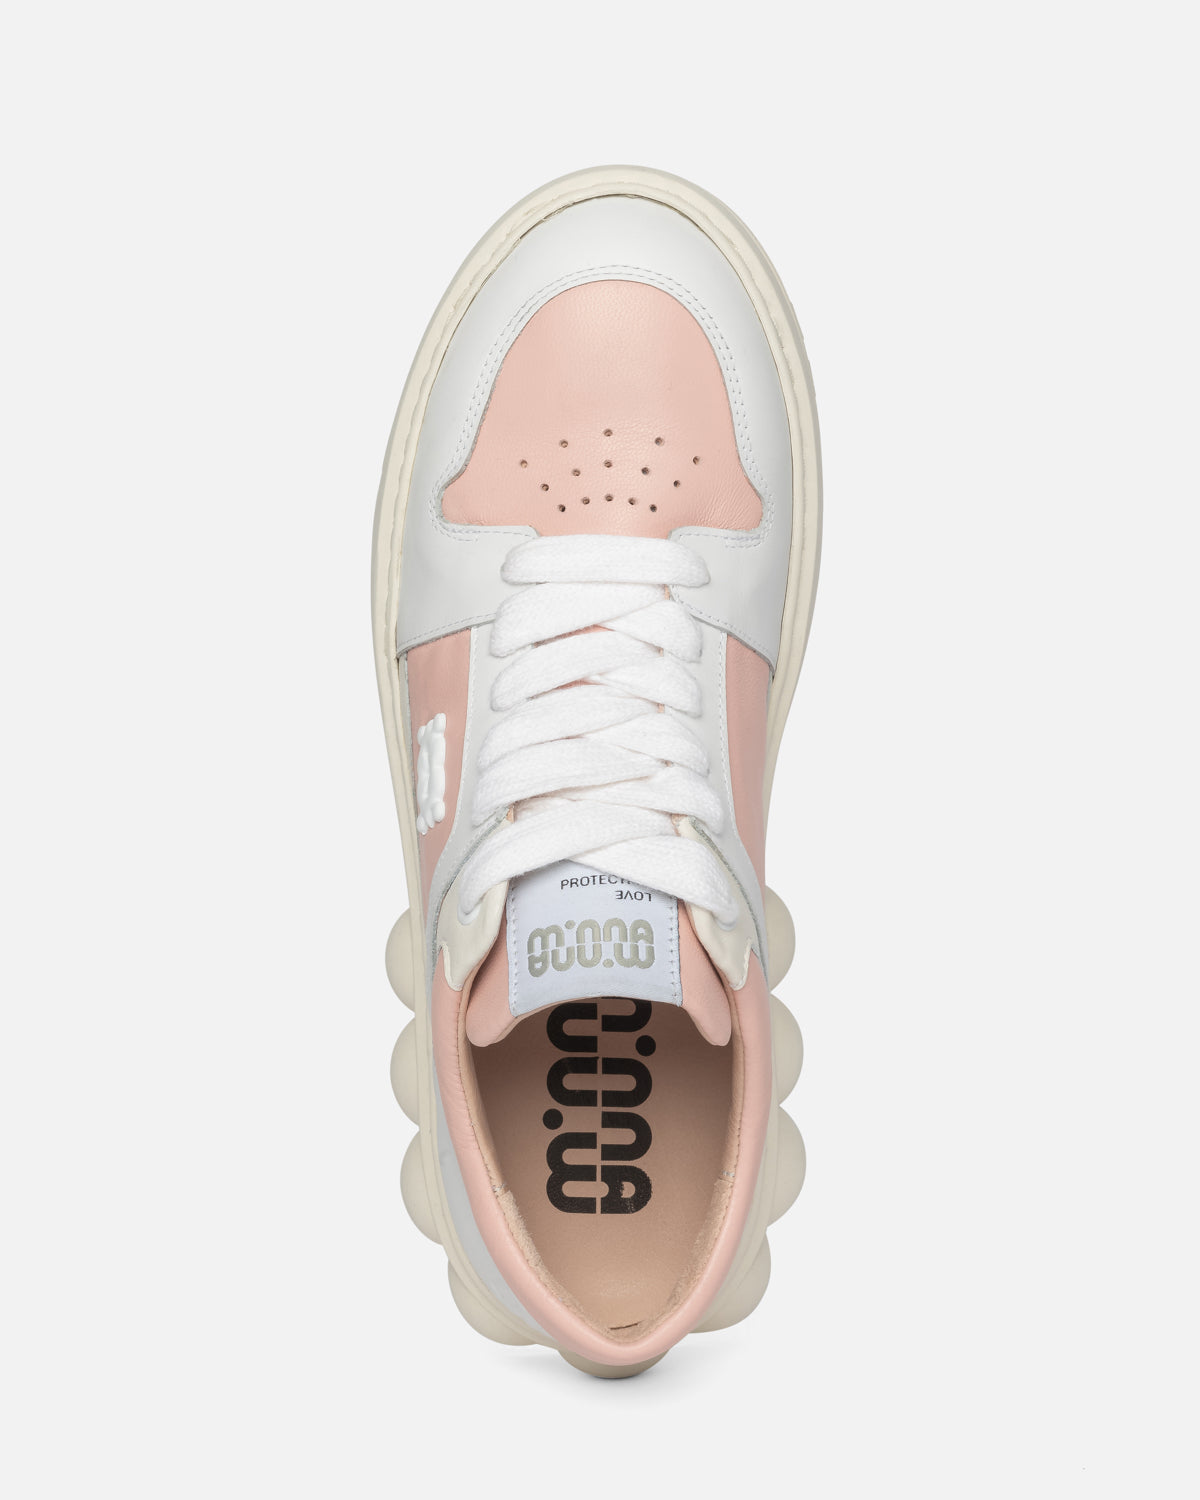 Oyster Pink/White Leather